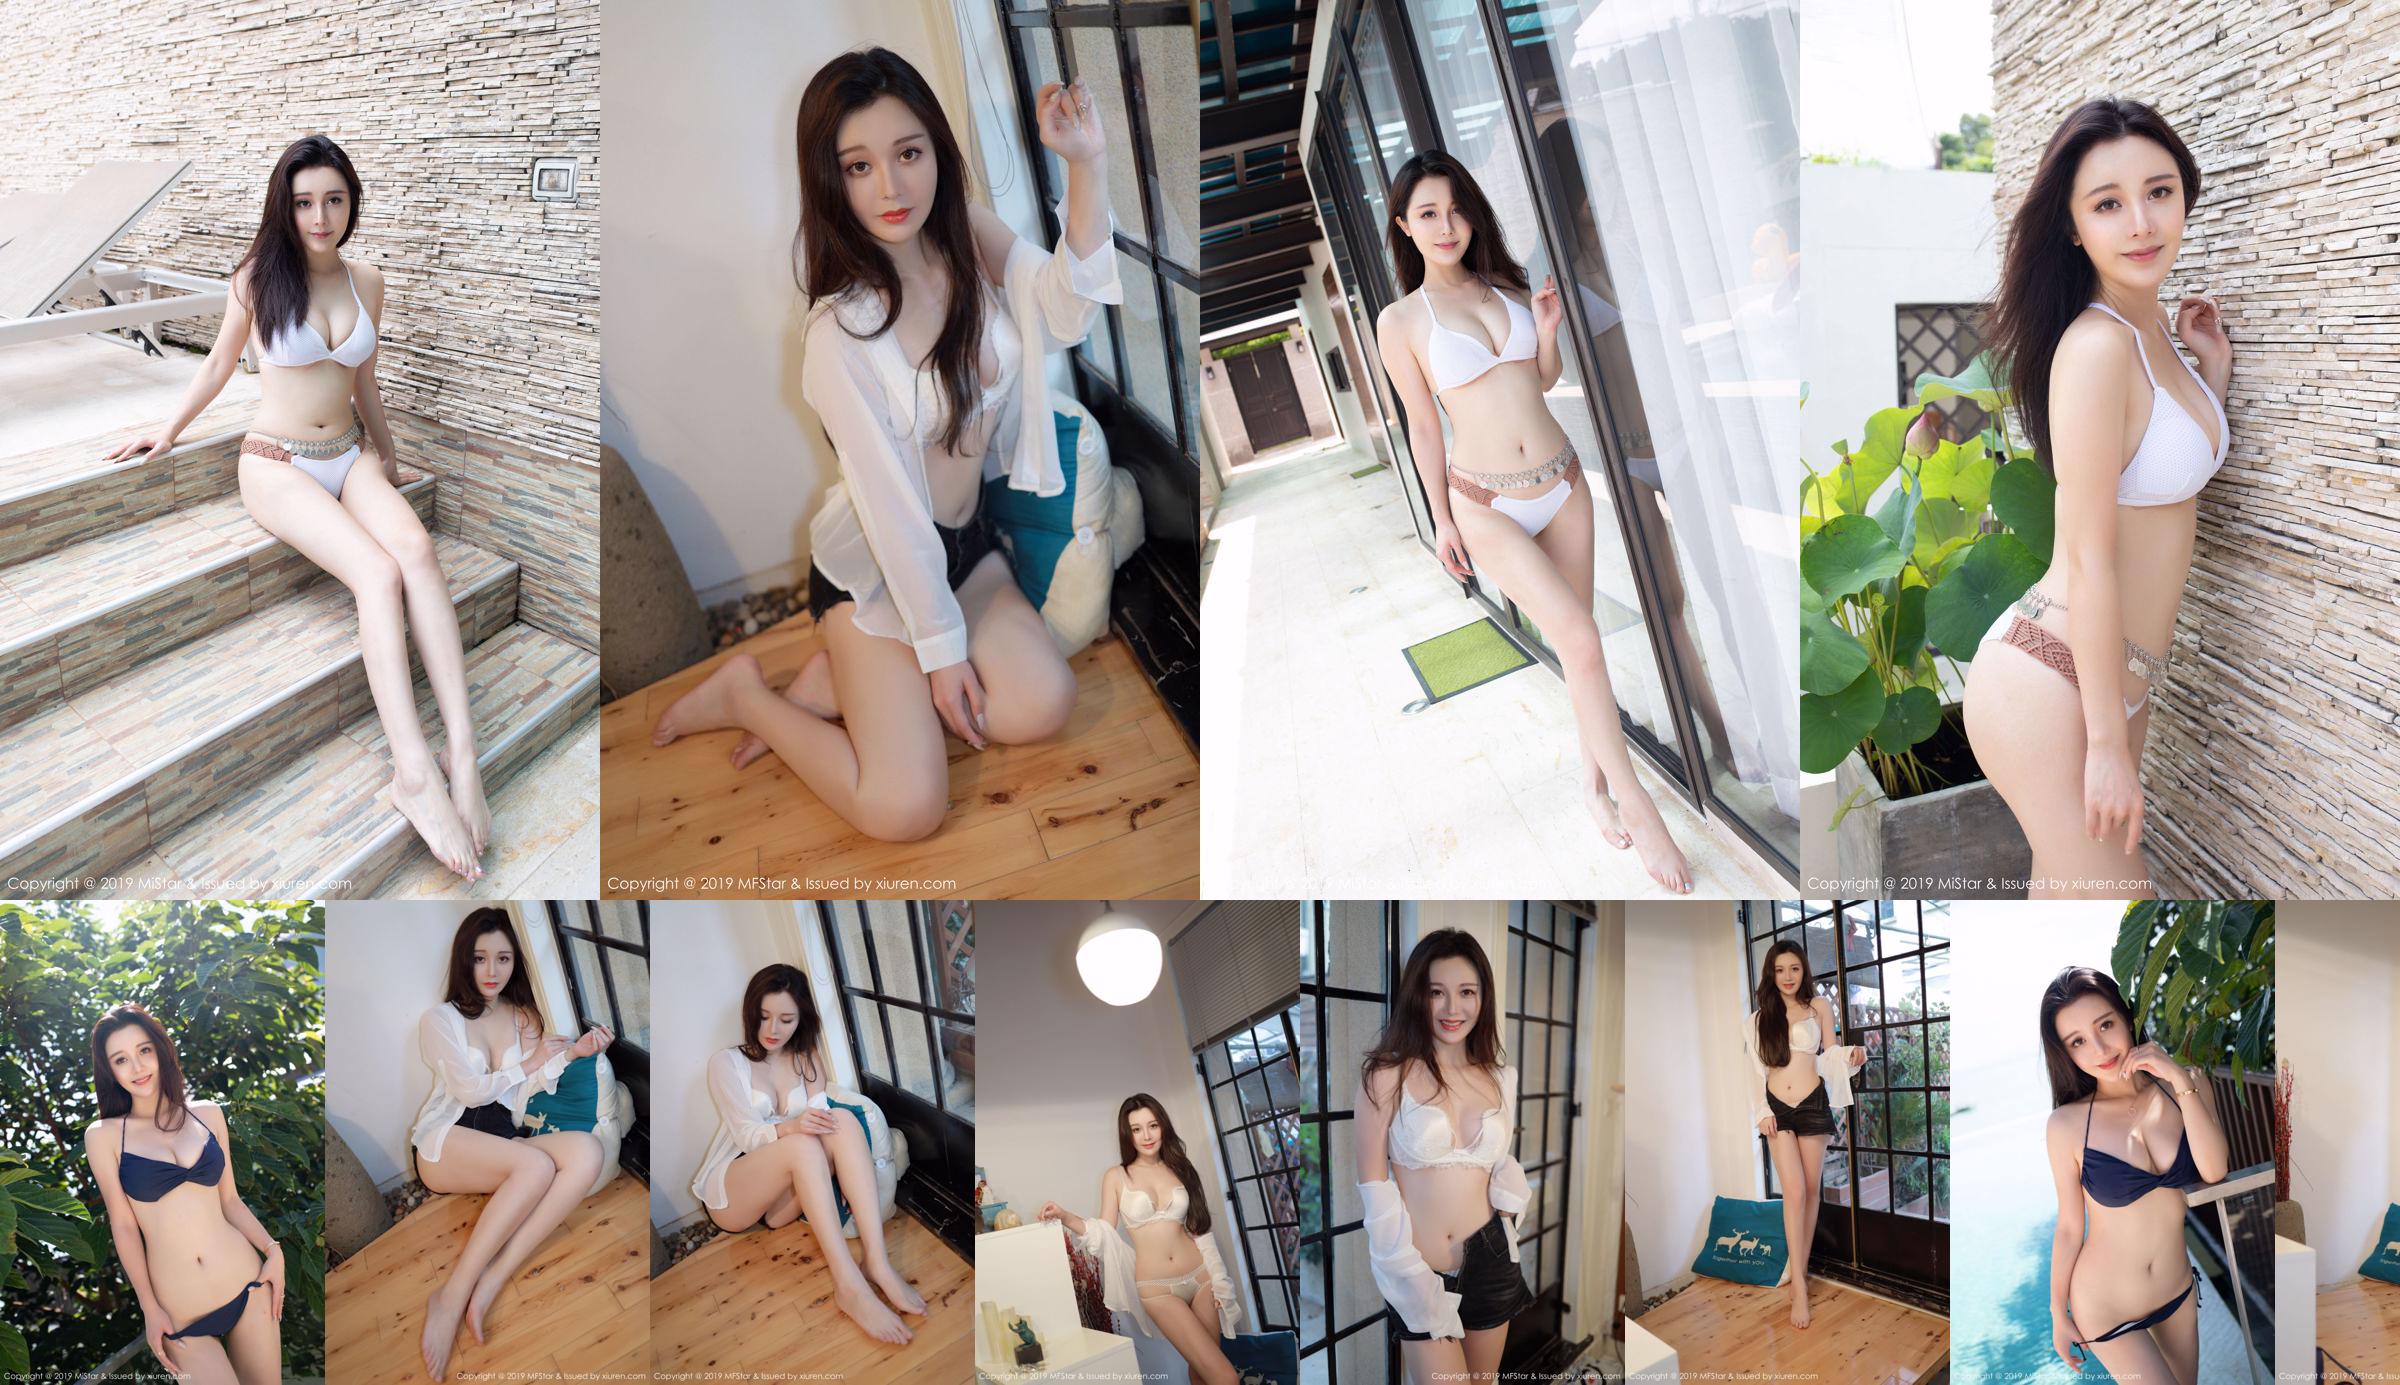 Bonnie Boonie "Body is tall, multi-faceted, delicate and beautiful" [Model Academy MFStar] Vol.227 No.859b6c Page 1